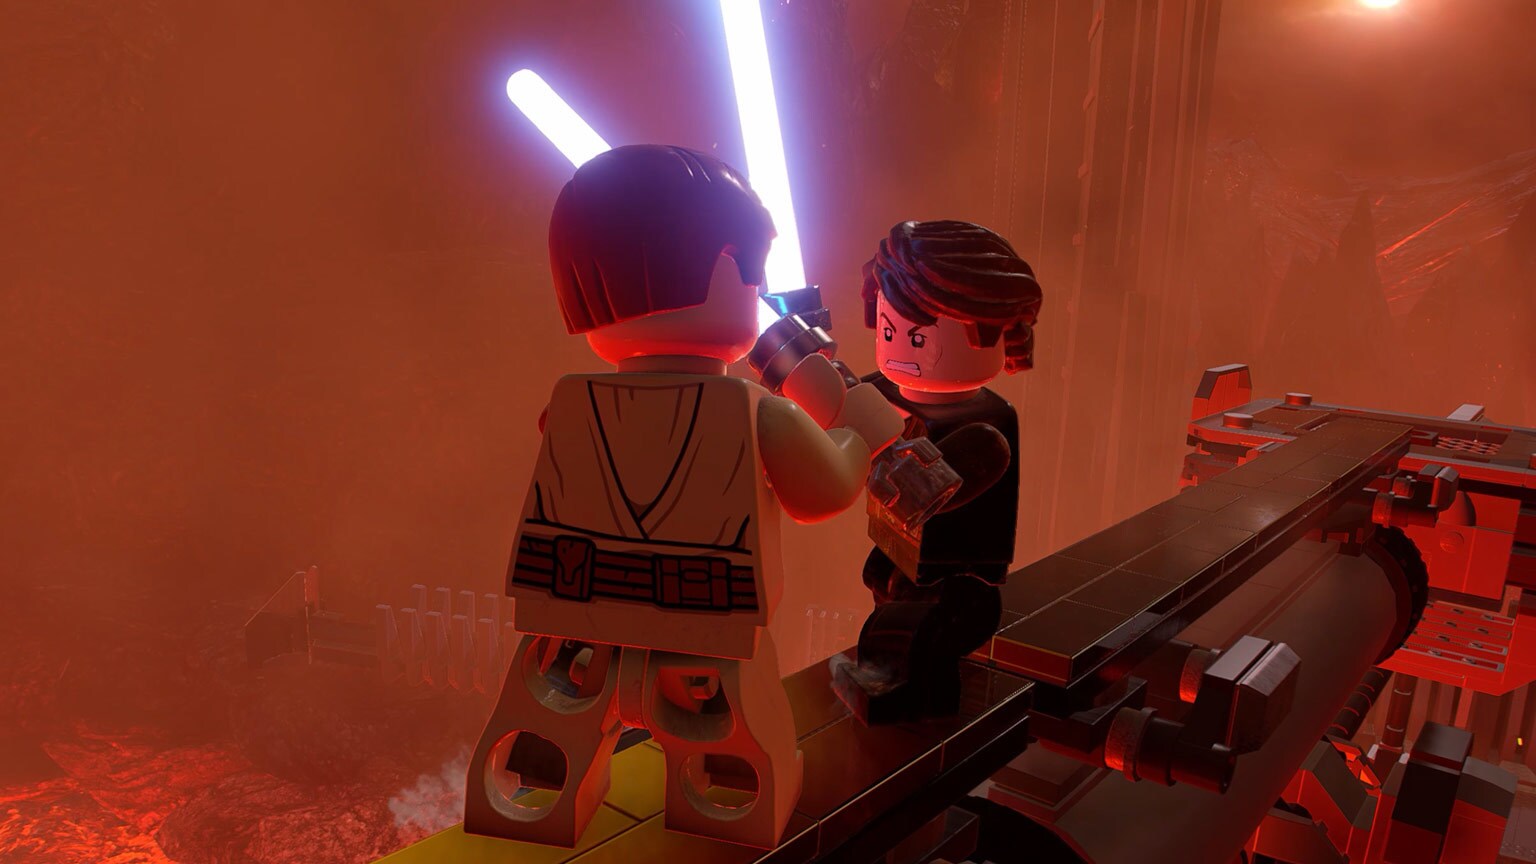 LEGO Star Wars meets Classic Space in a fan-made mashup